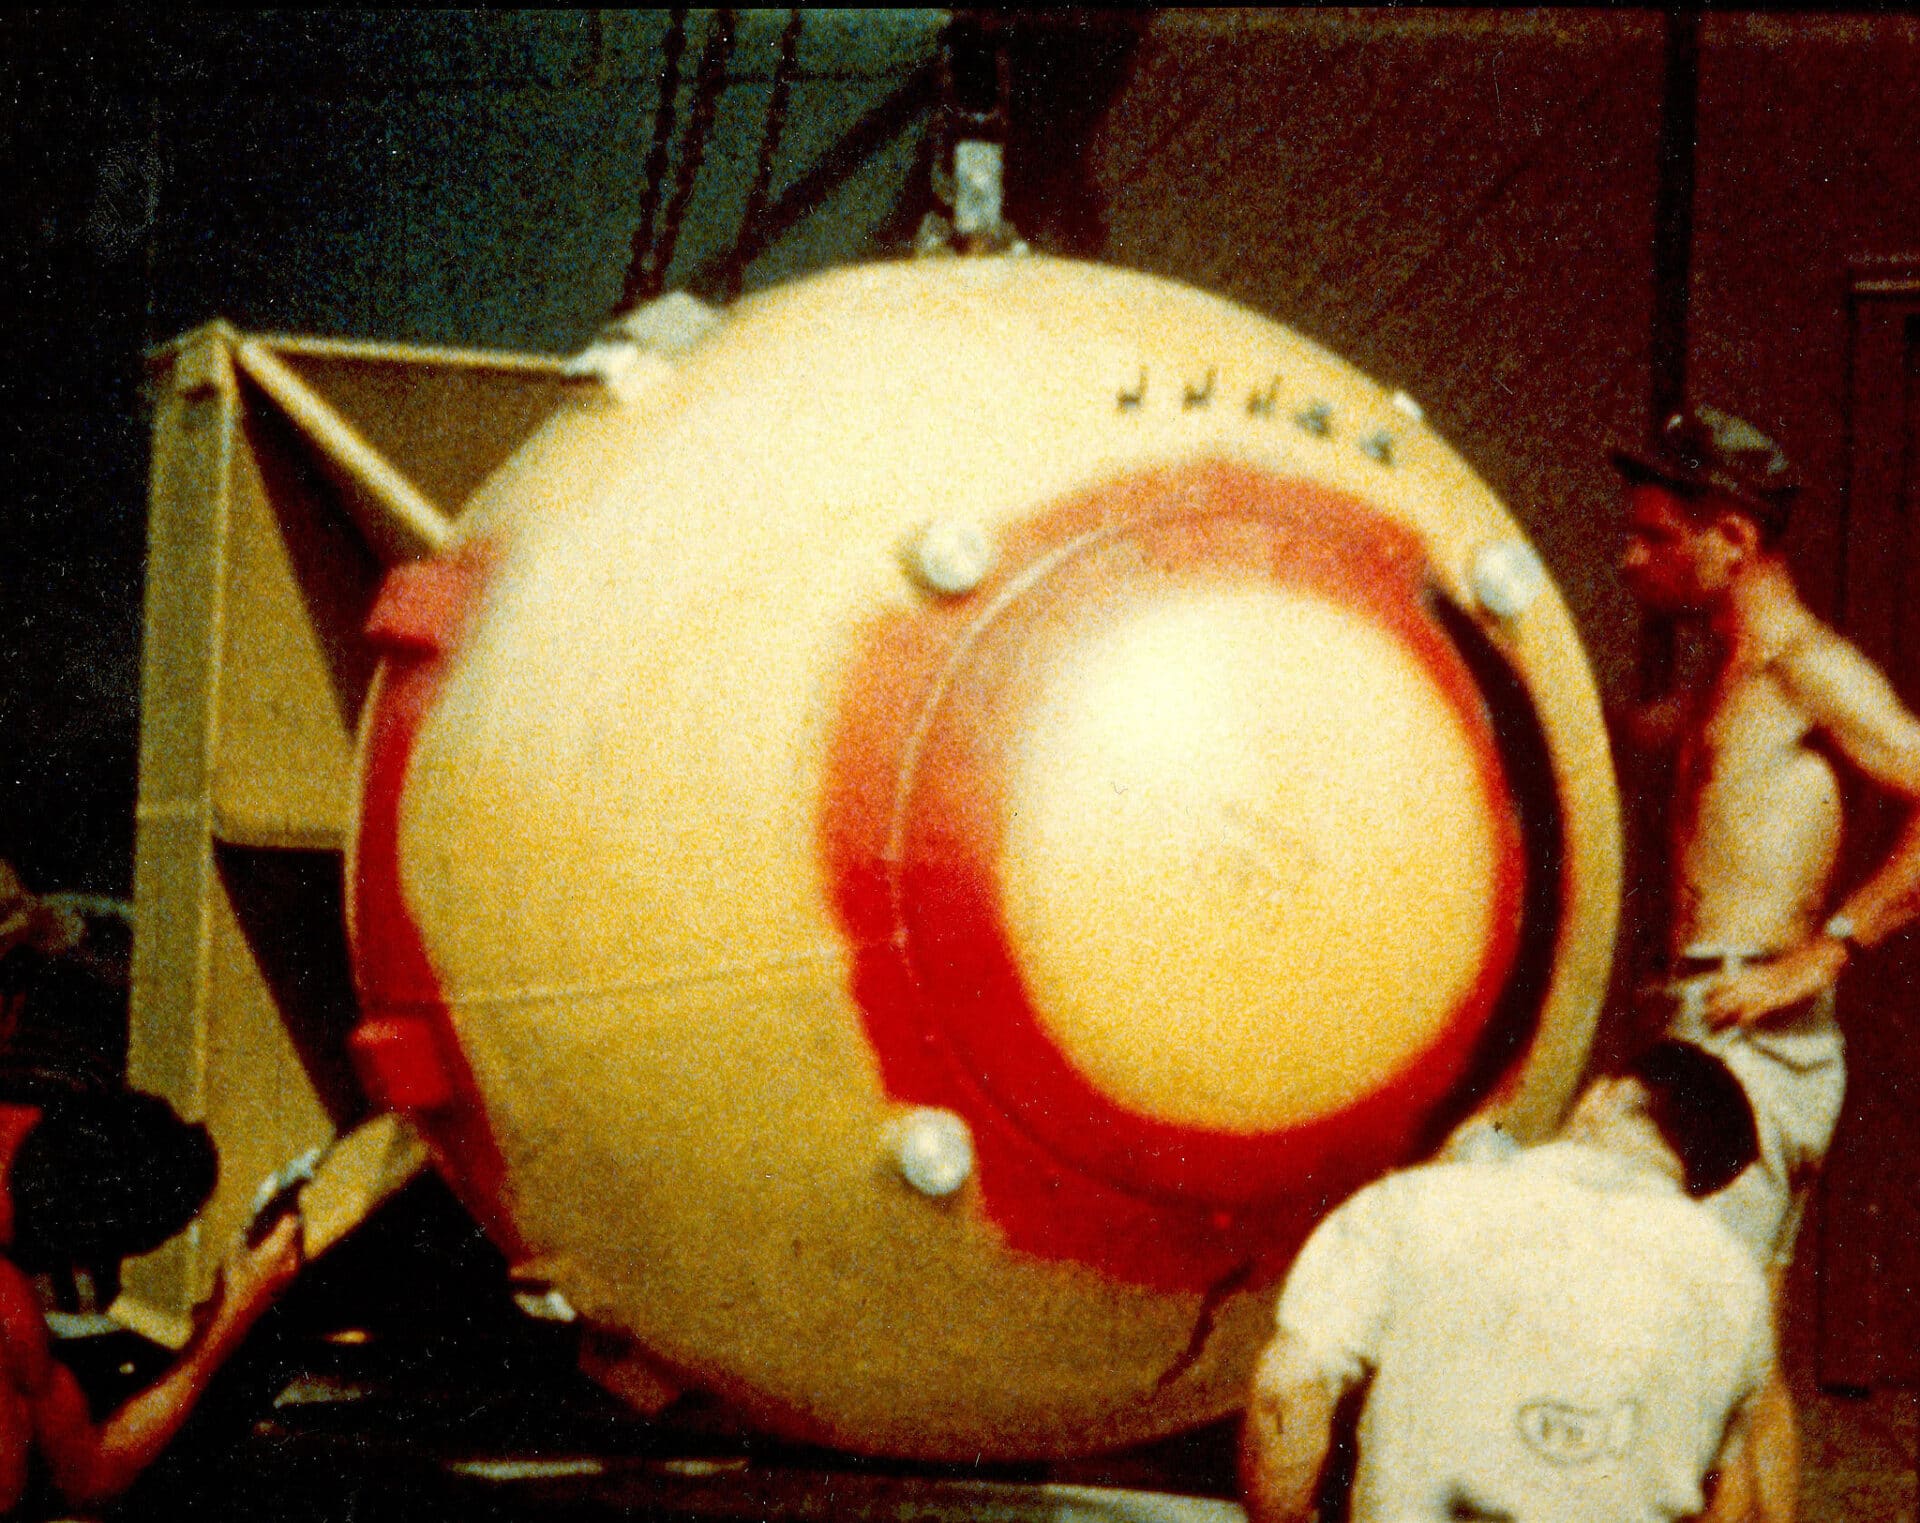 Assembling the components of the Fat Man atomic bomb on the South Pacific island of Tinian. Photo courtesy of Los Alamos National Laboratory.